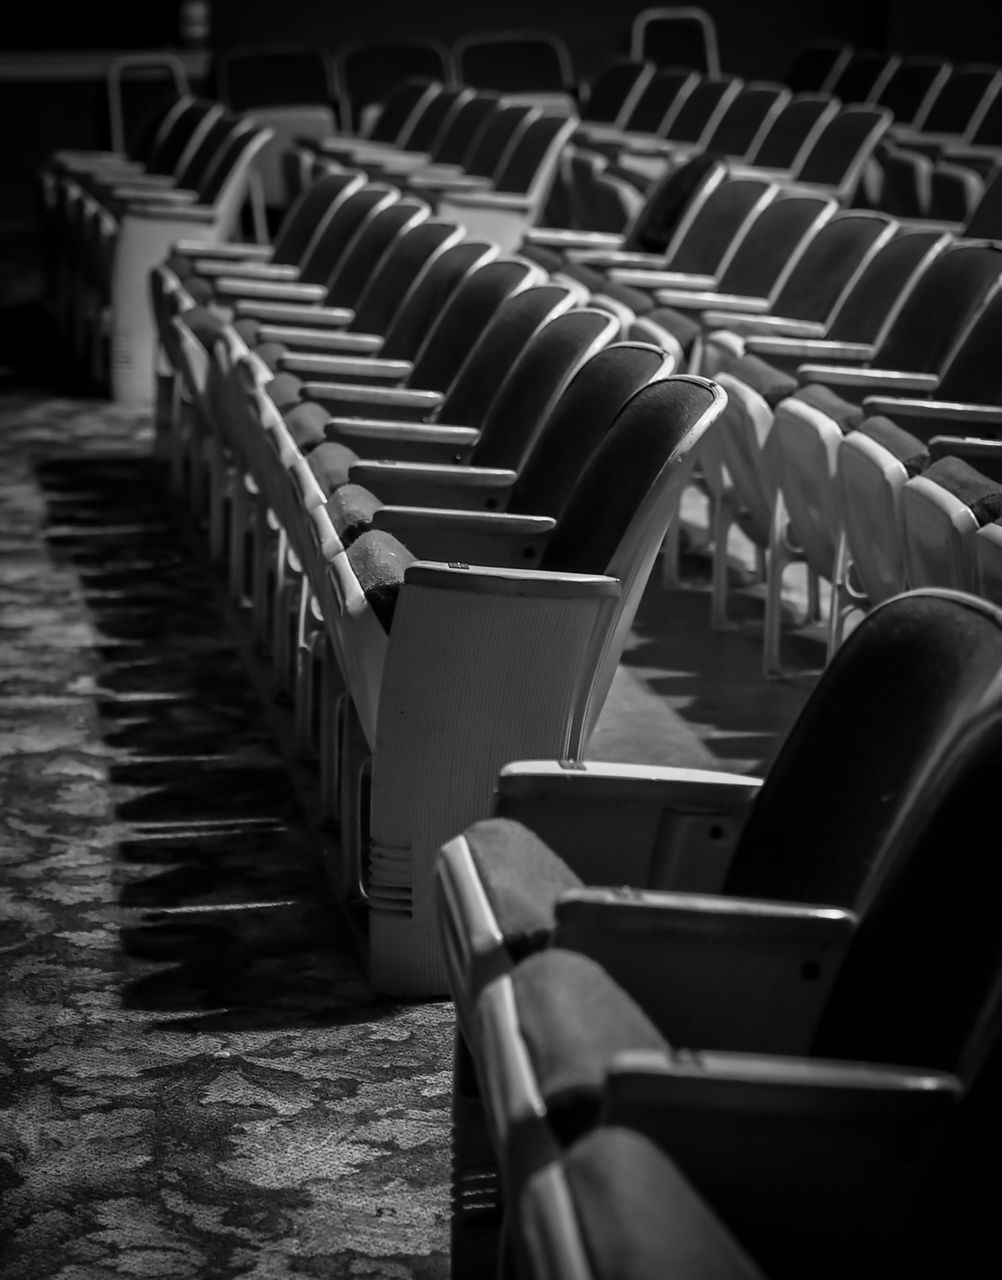 Empty chairs ritz theater